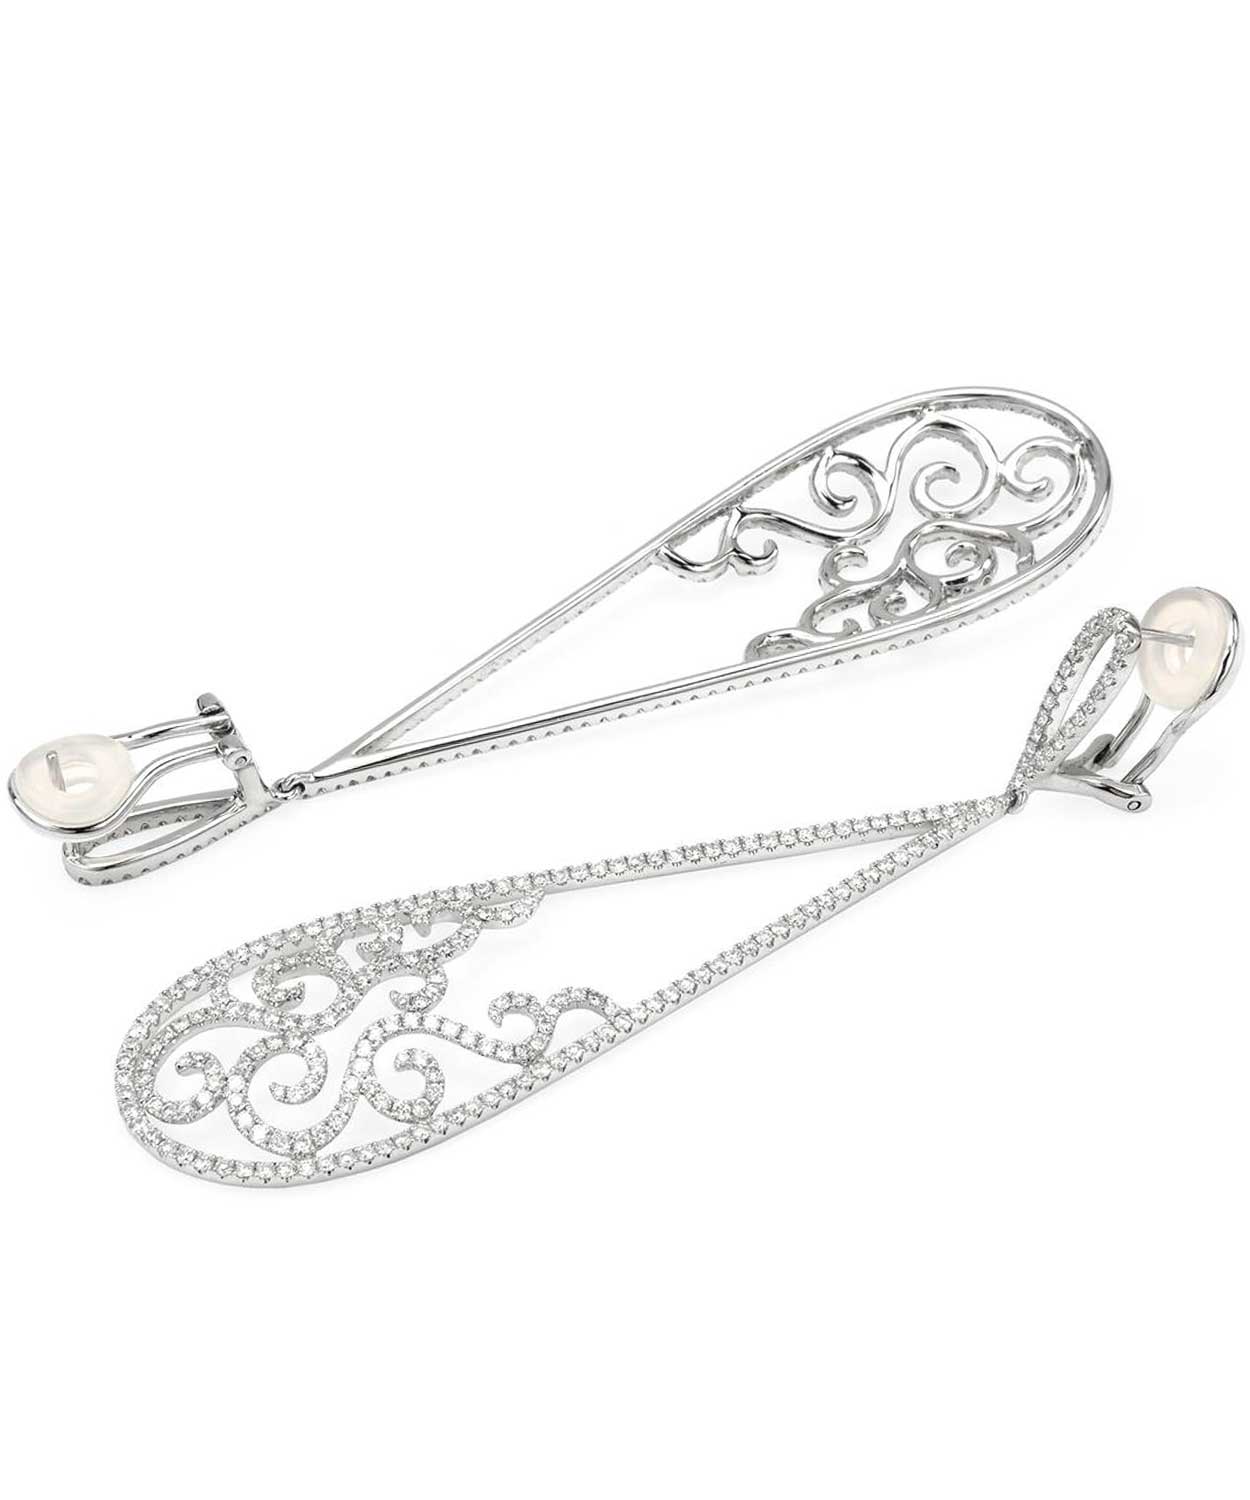 Allure Collection 4.25 ctw Diamond 14k White Gold Dangle Earrings View 2